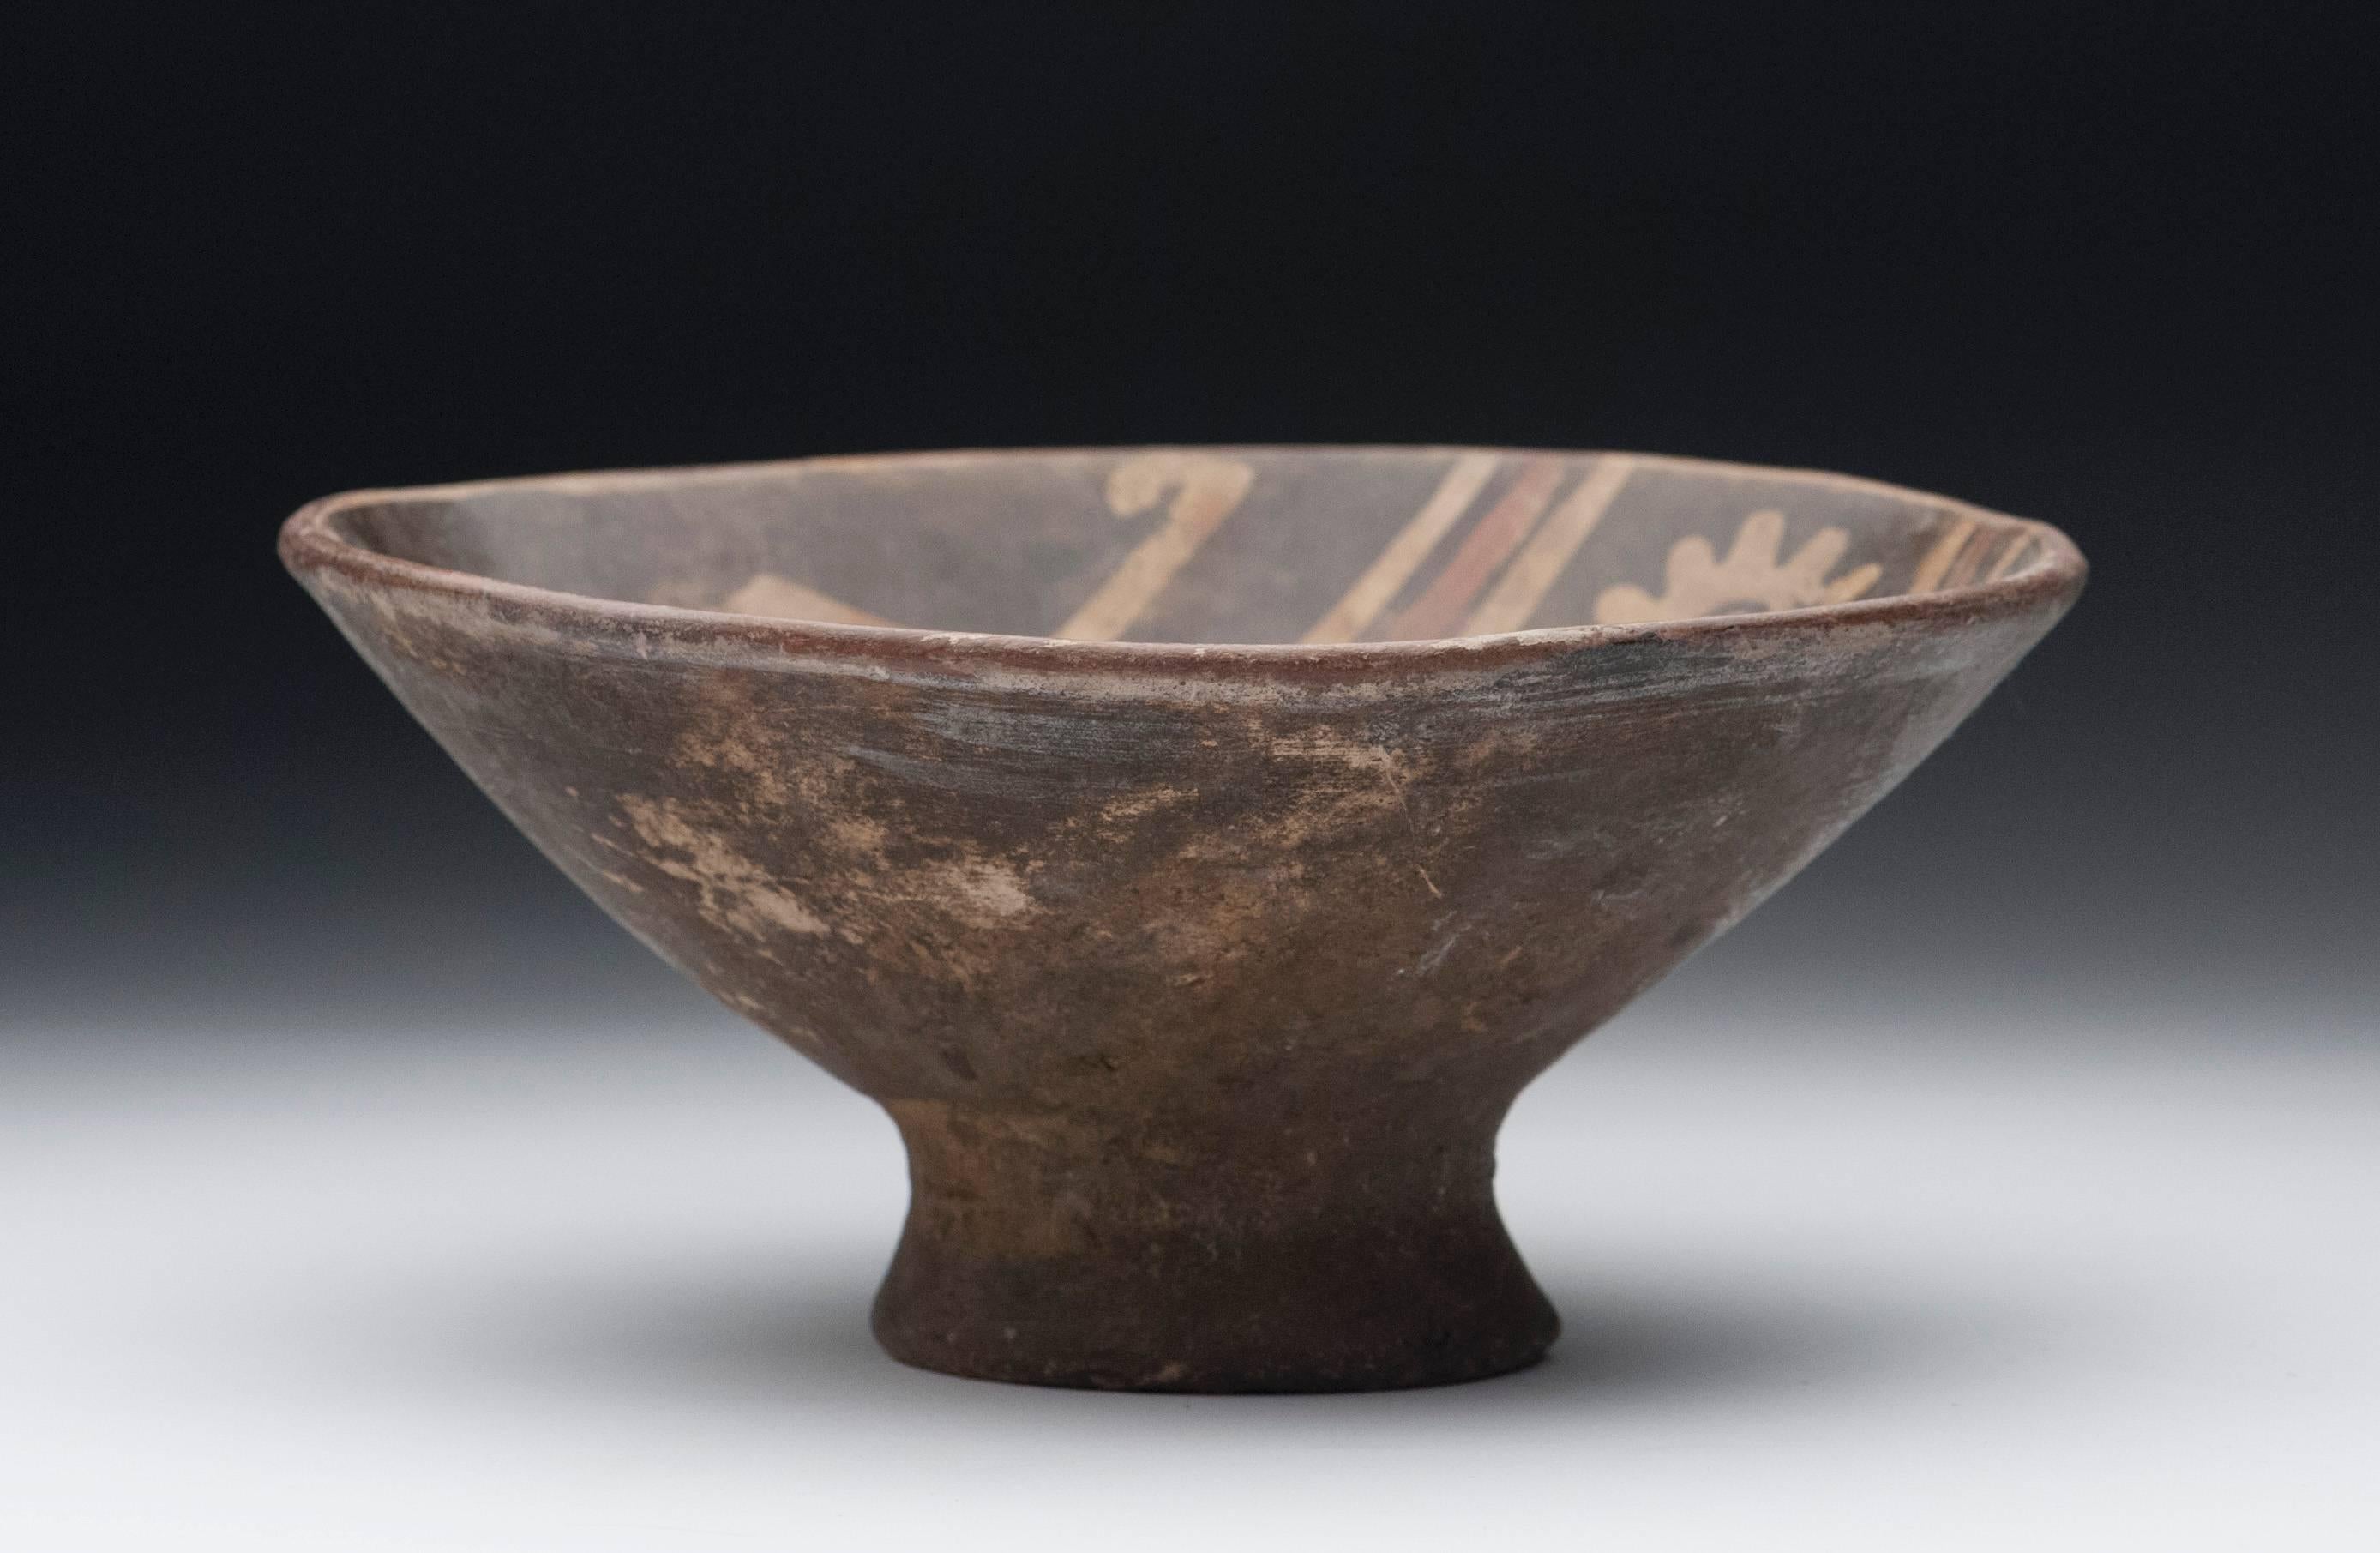 Pre-Columbian bowl from the Narino region of Columbia, circa 800 to 1500 AD. Desirable polychrome bowl with interior decorated with two monkeys.